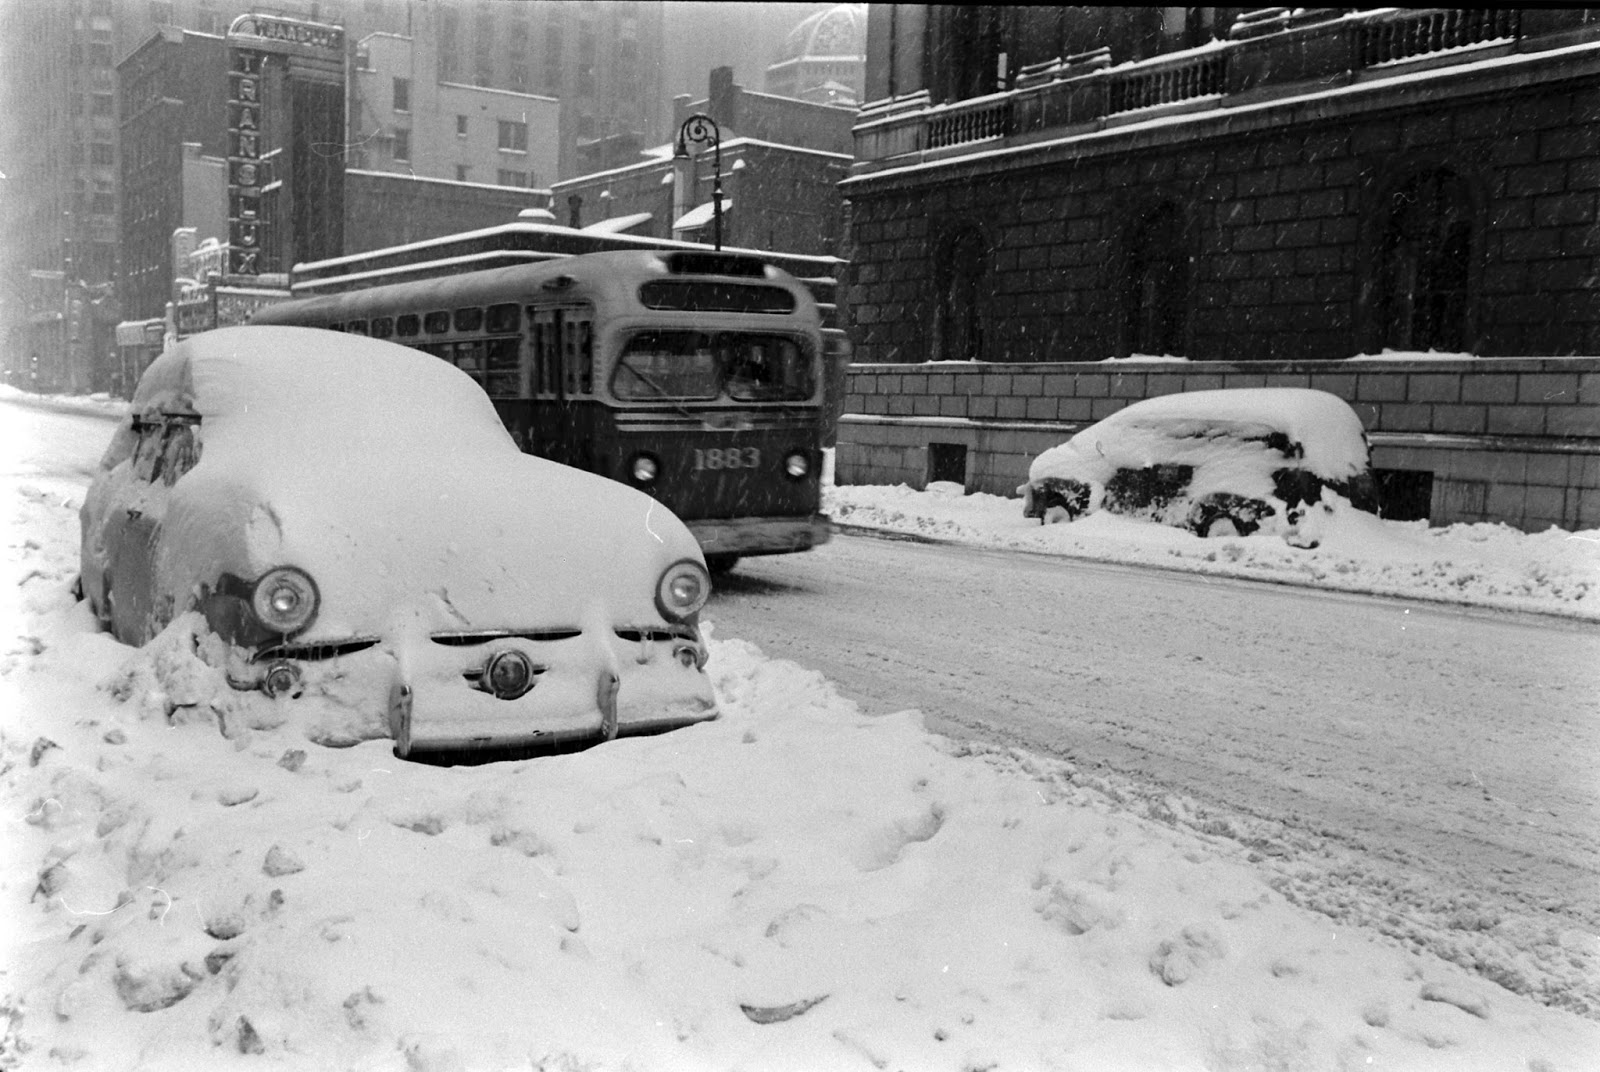 Earth In The Past: Snow & Cold of March 1956: Photos of the Snowy New York